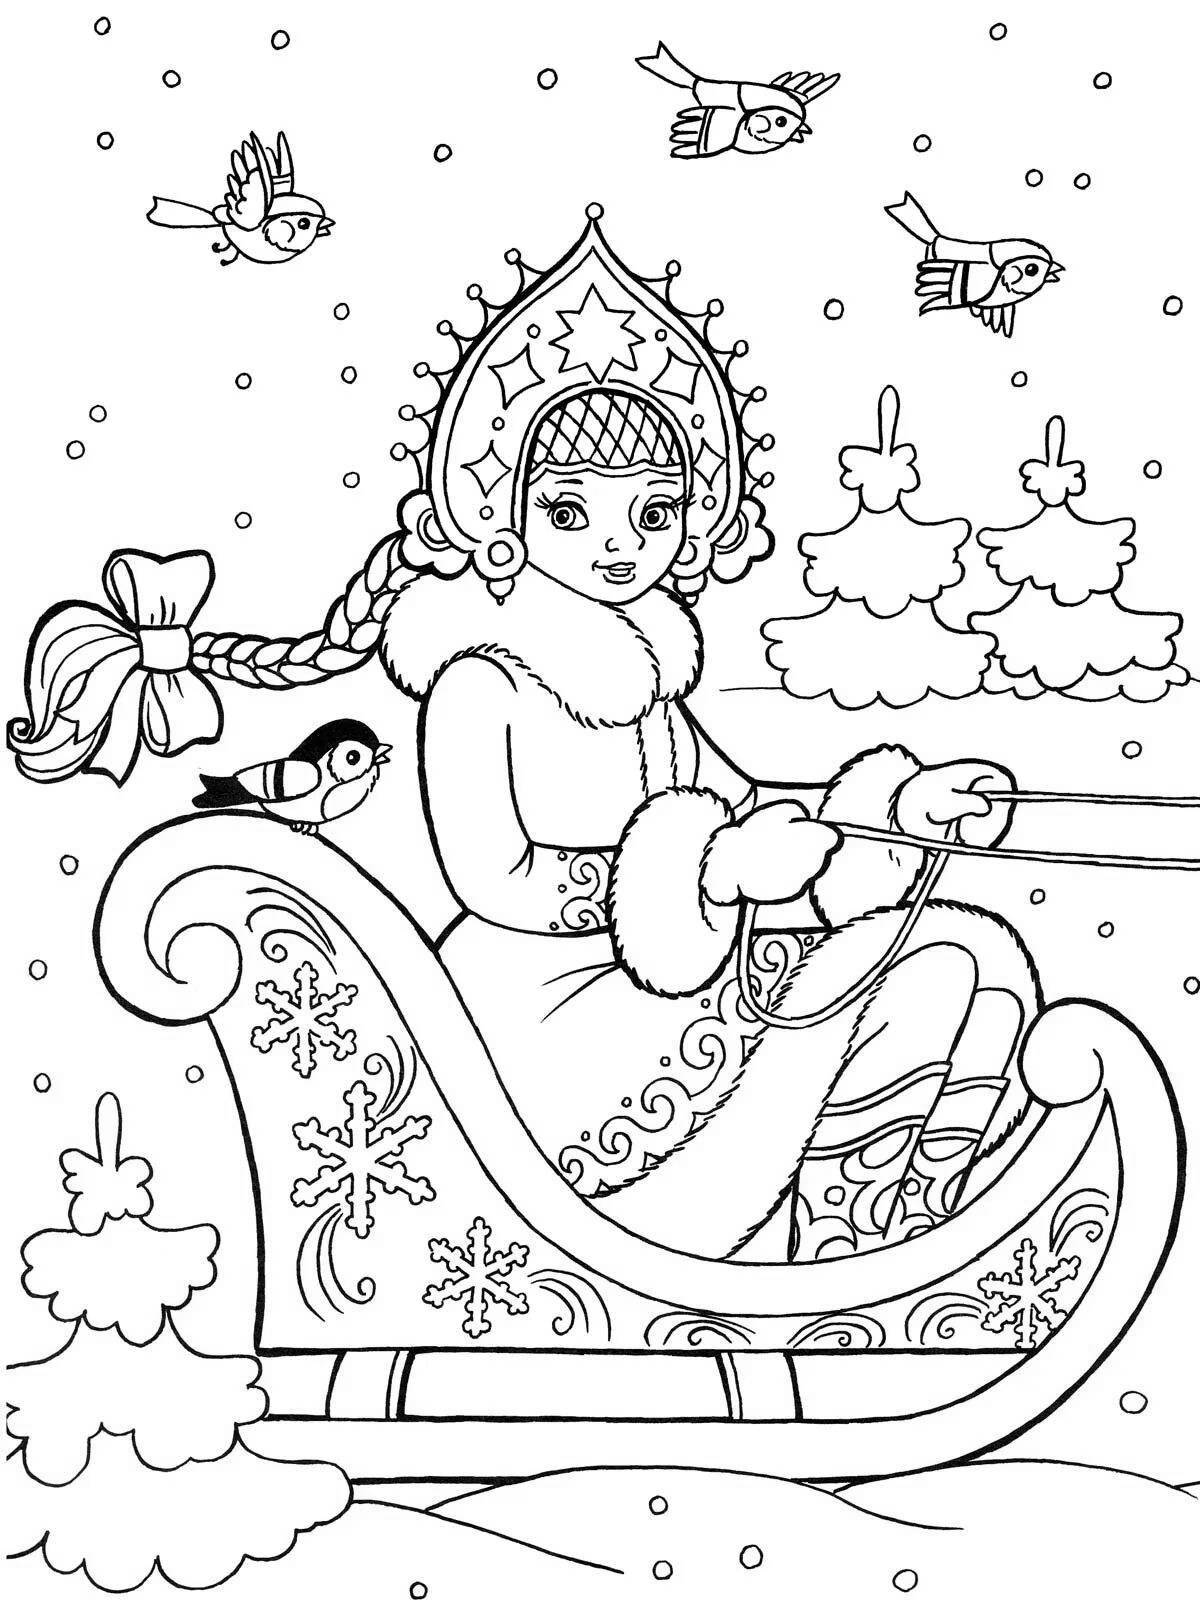 Violent Christmas coloring book for girls